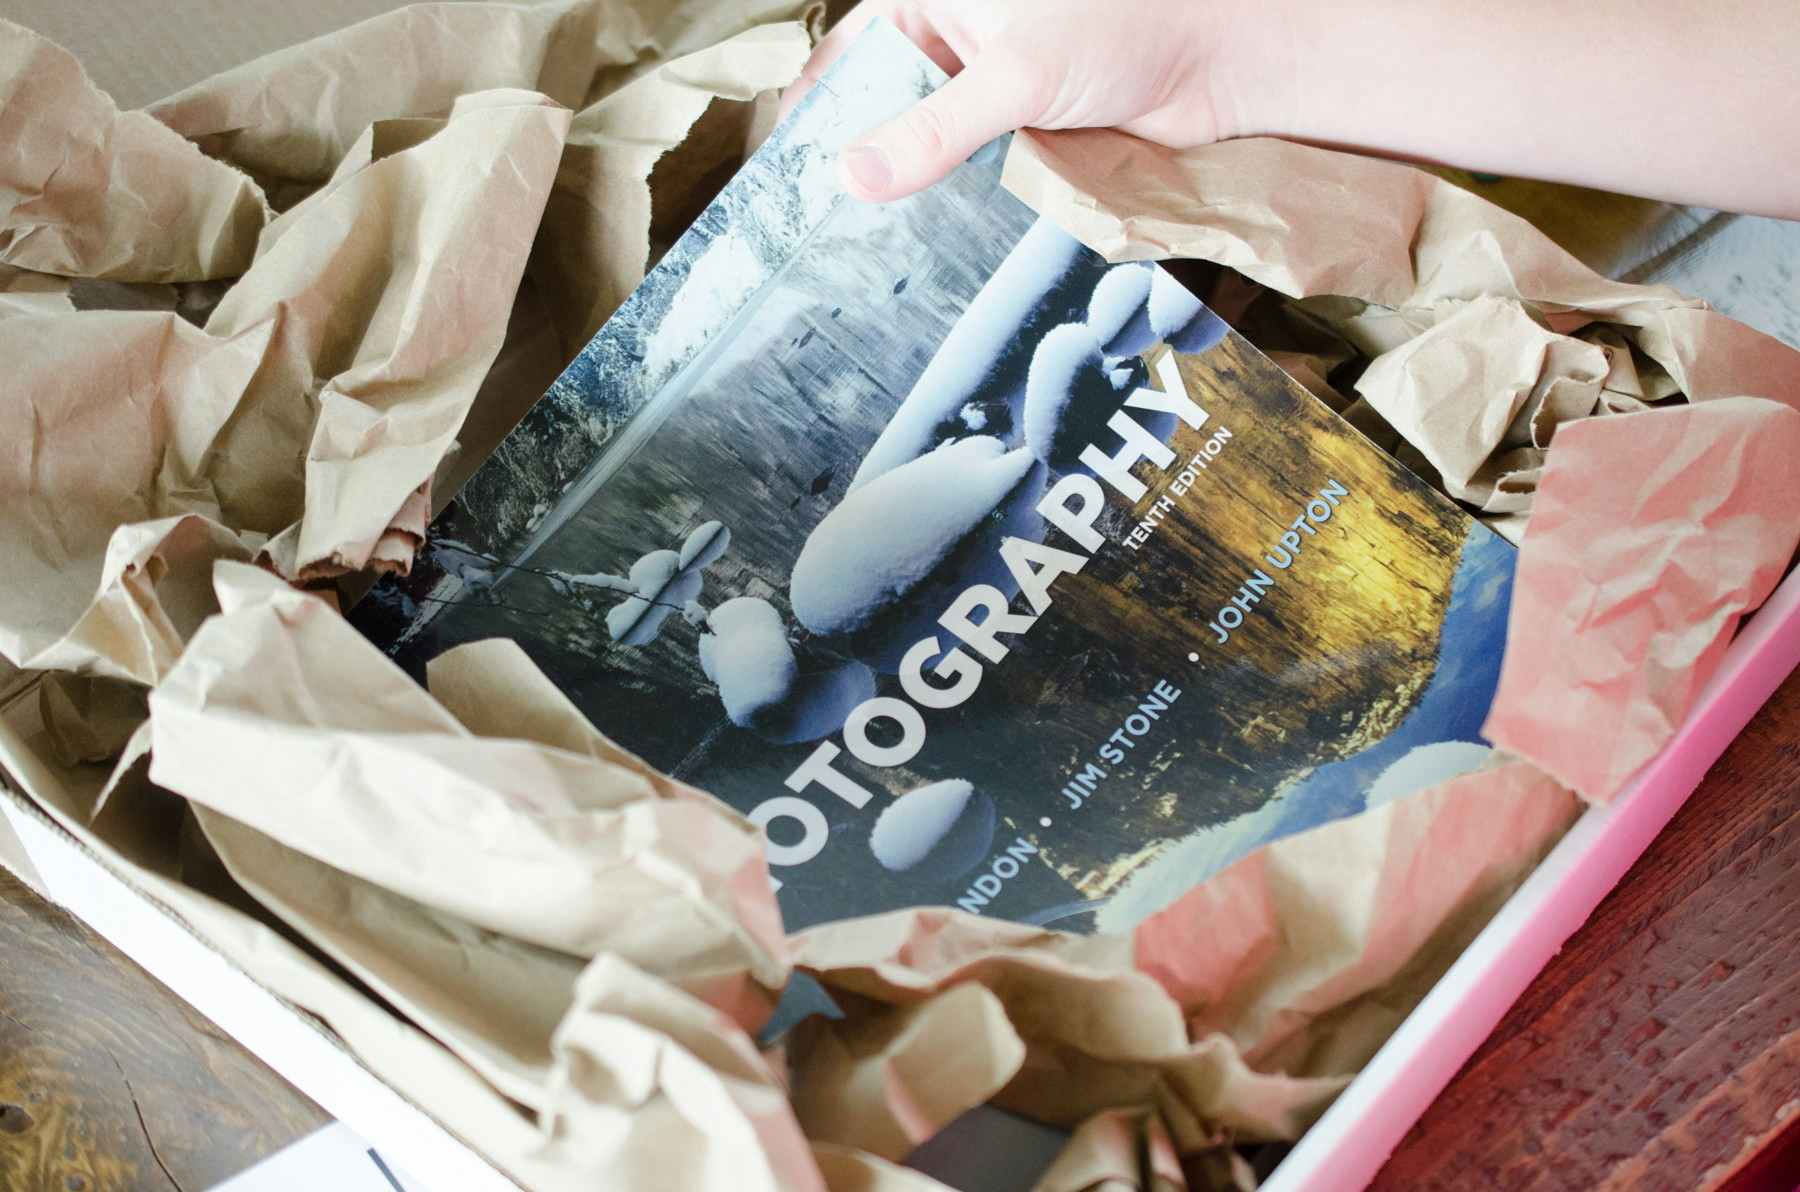 A person packing a photography book into a box